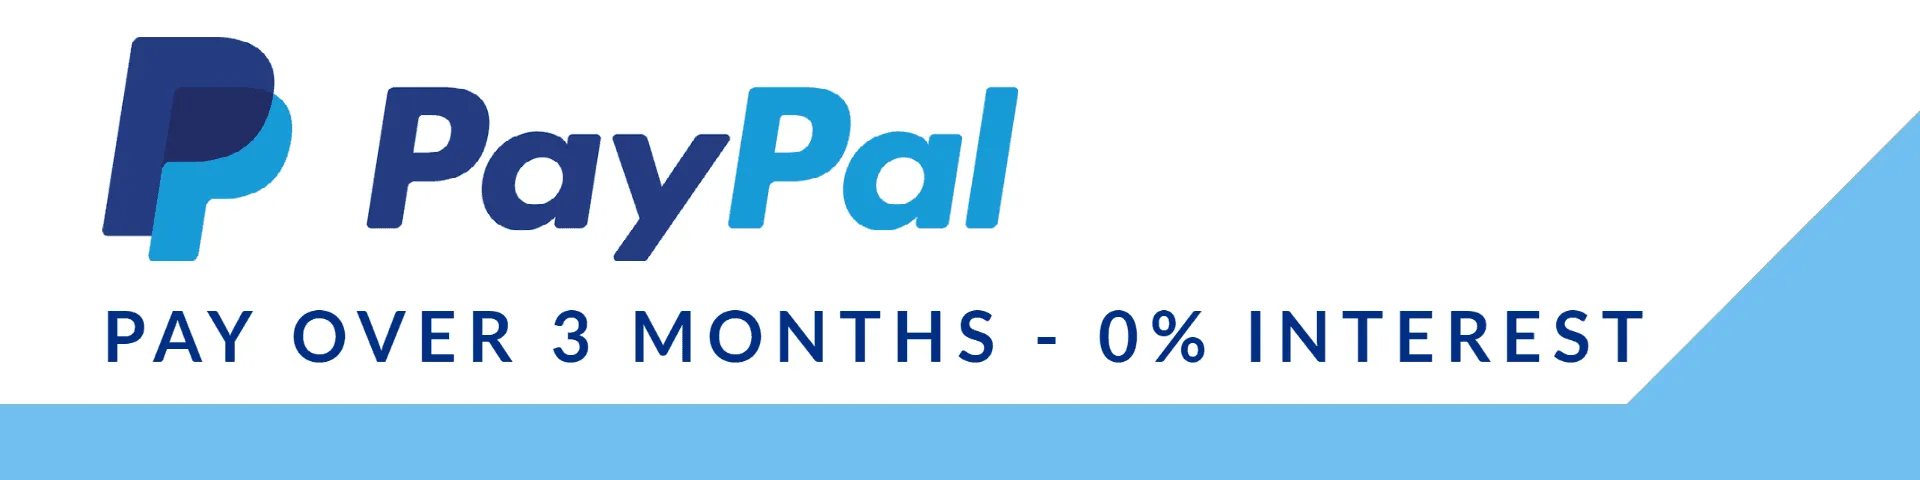 Paypal Pay Later